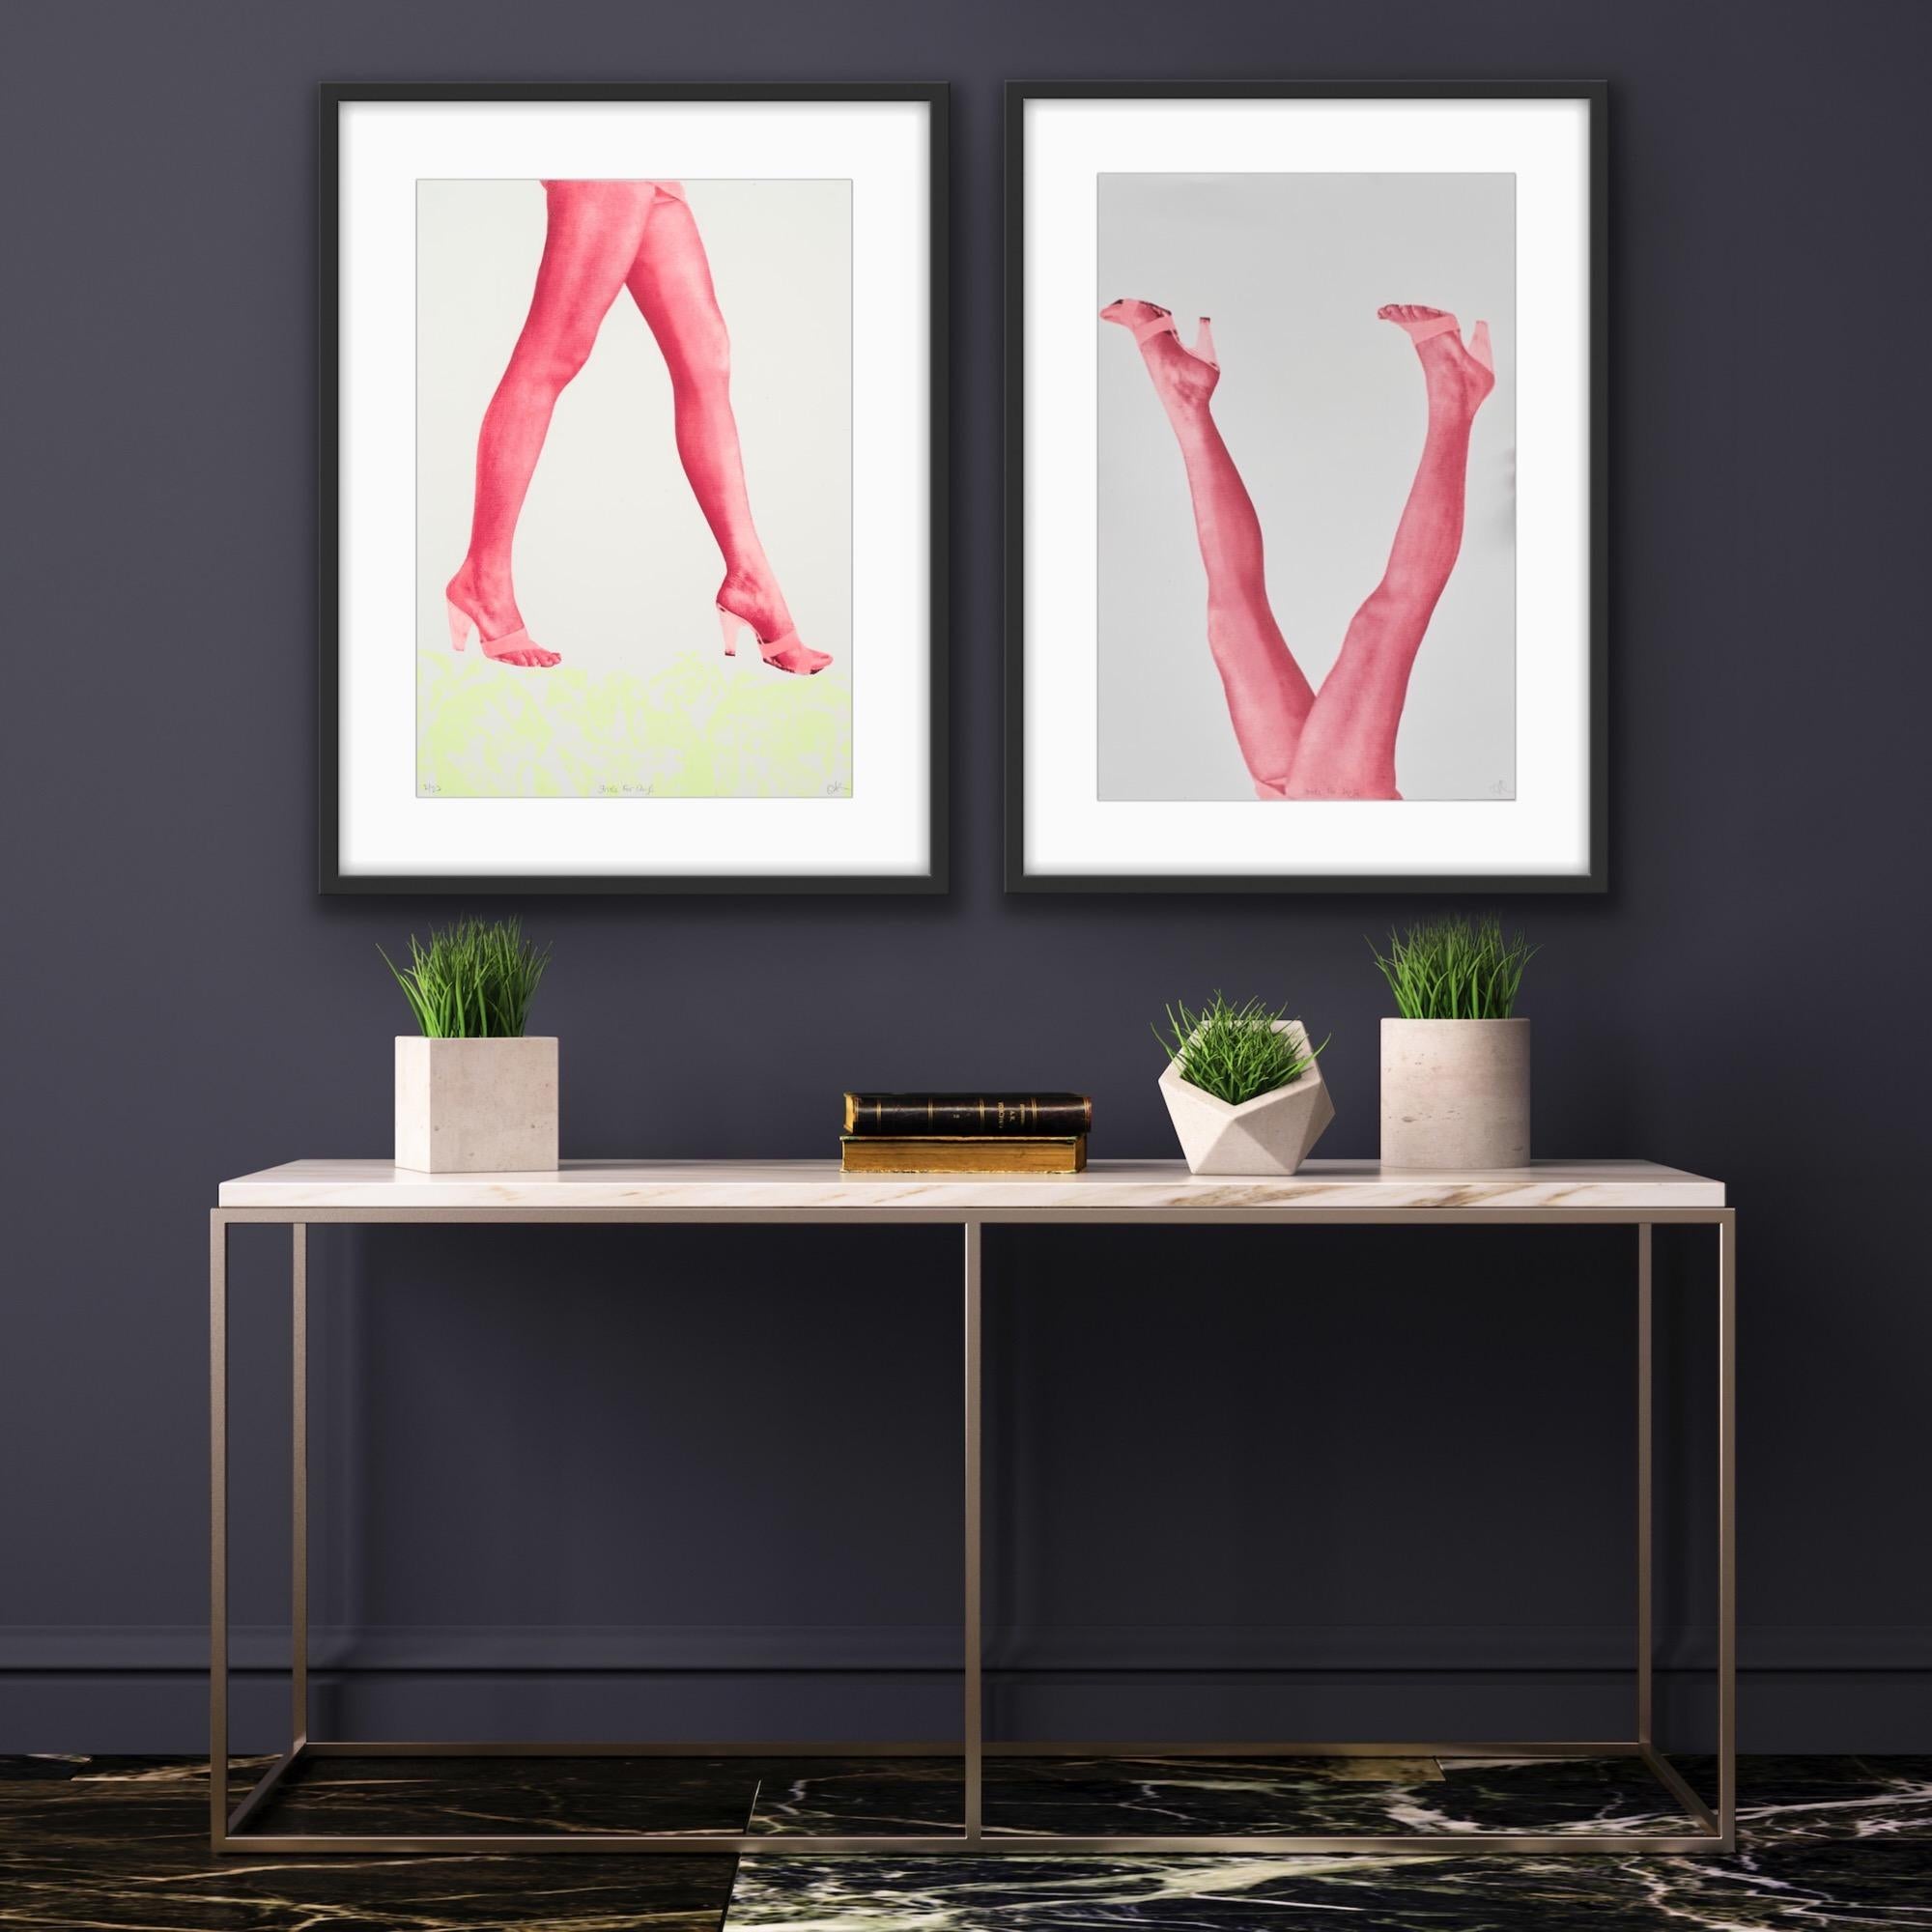 Stride for Days and Stride for Days Upside Down Diptych - Realist Print by Amy Gardner